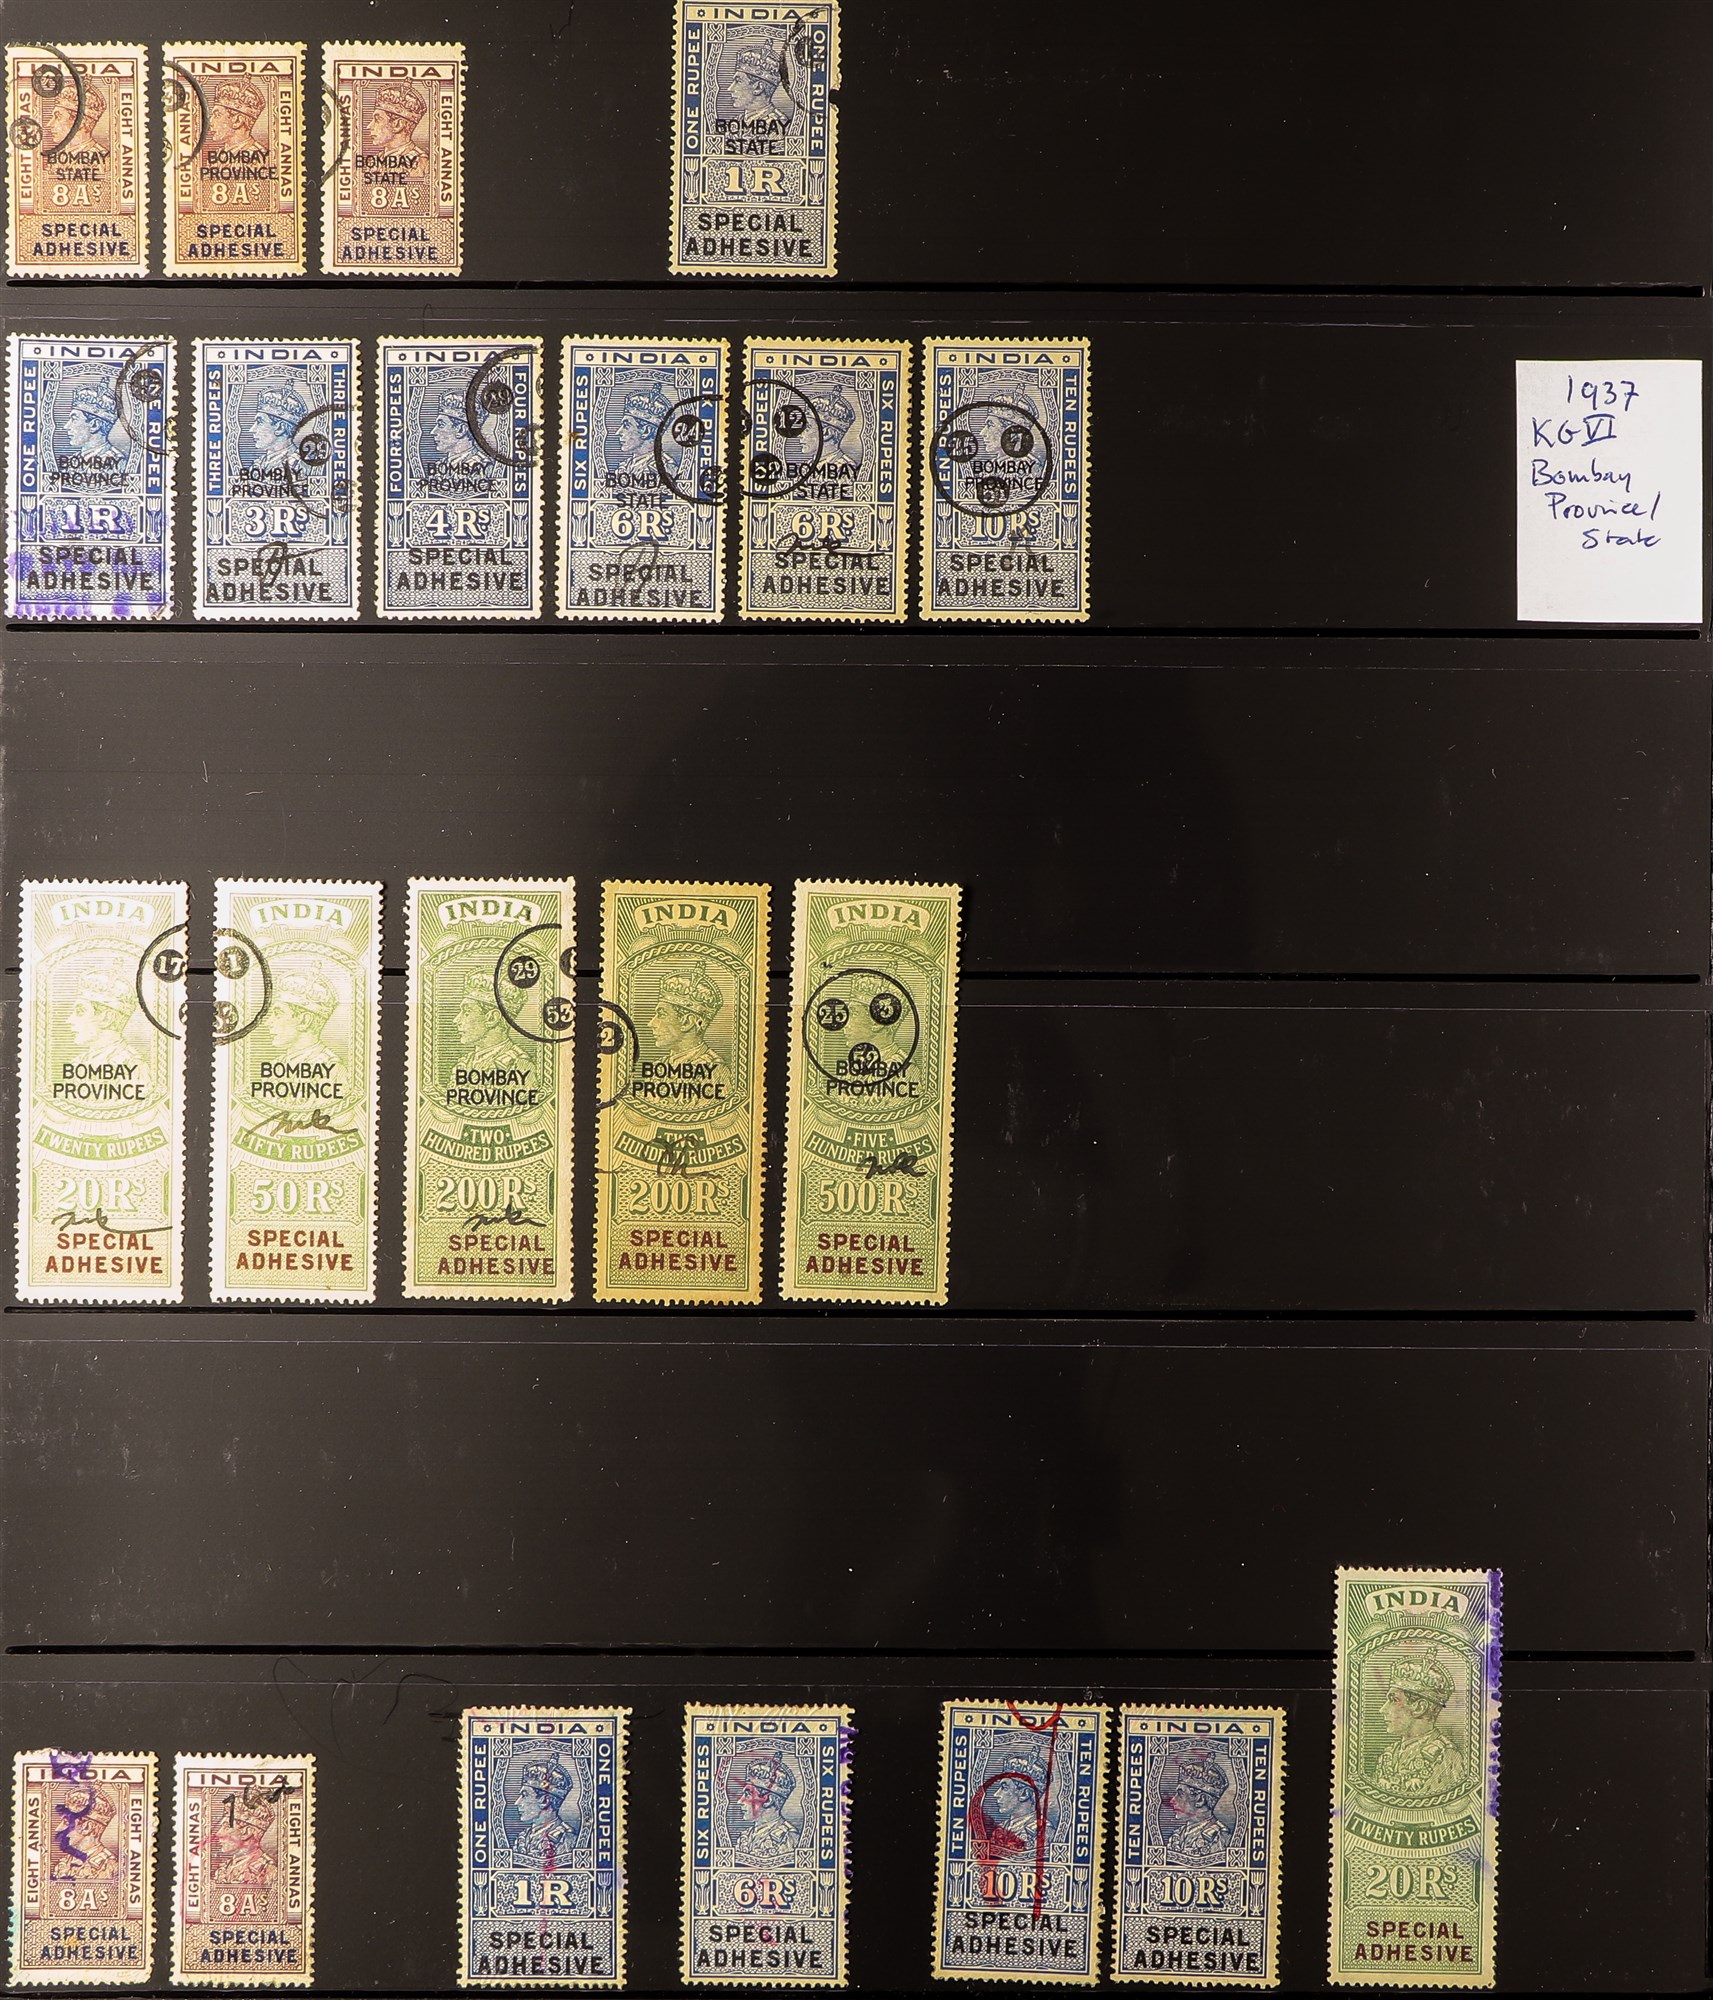 INDIA REVENUE STAMPS 1866 - 1975 collection of over 330 Special Adhesives on protective pages, - Image 5 of 8